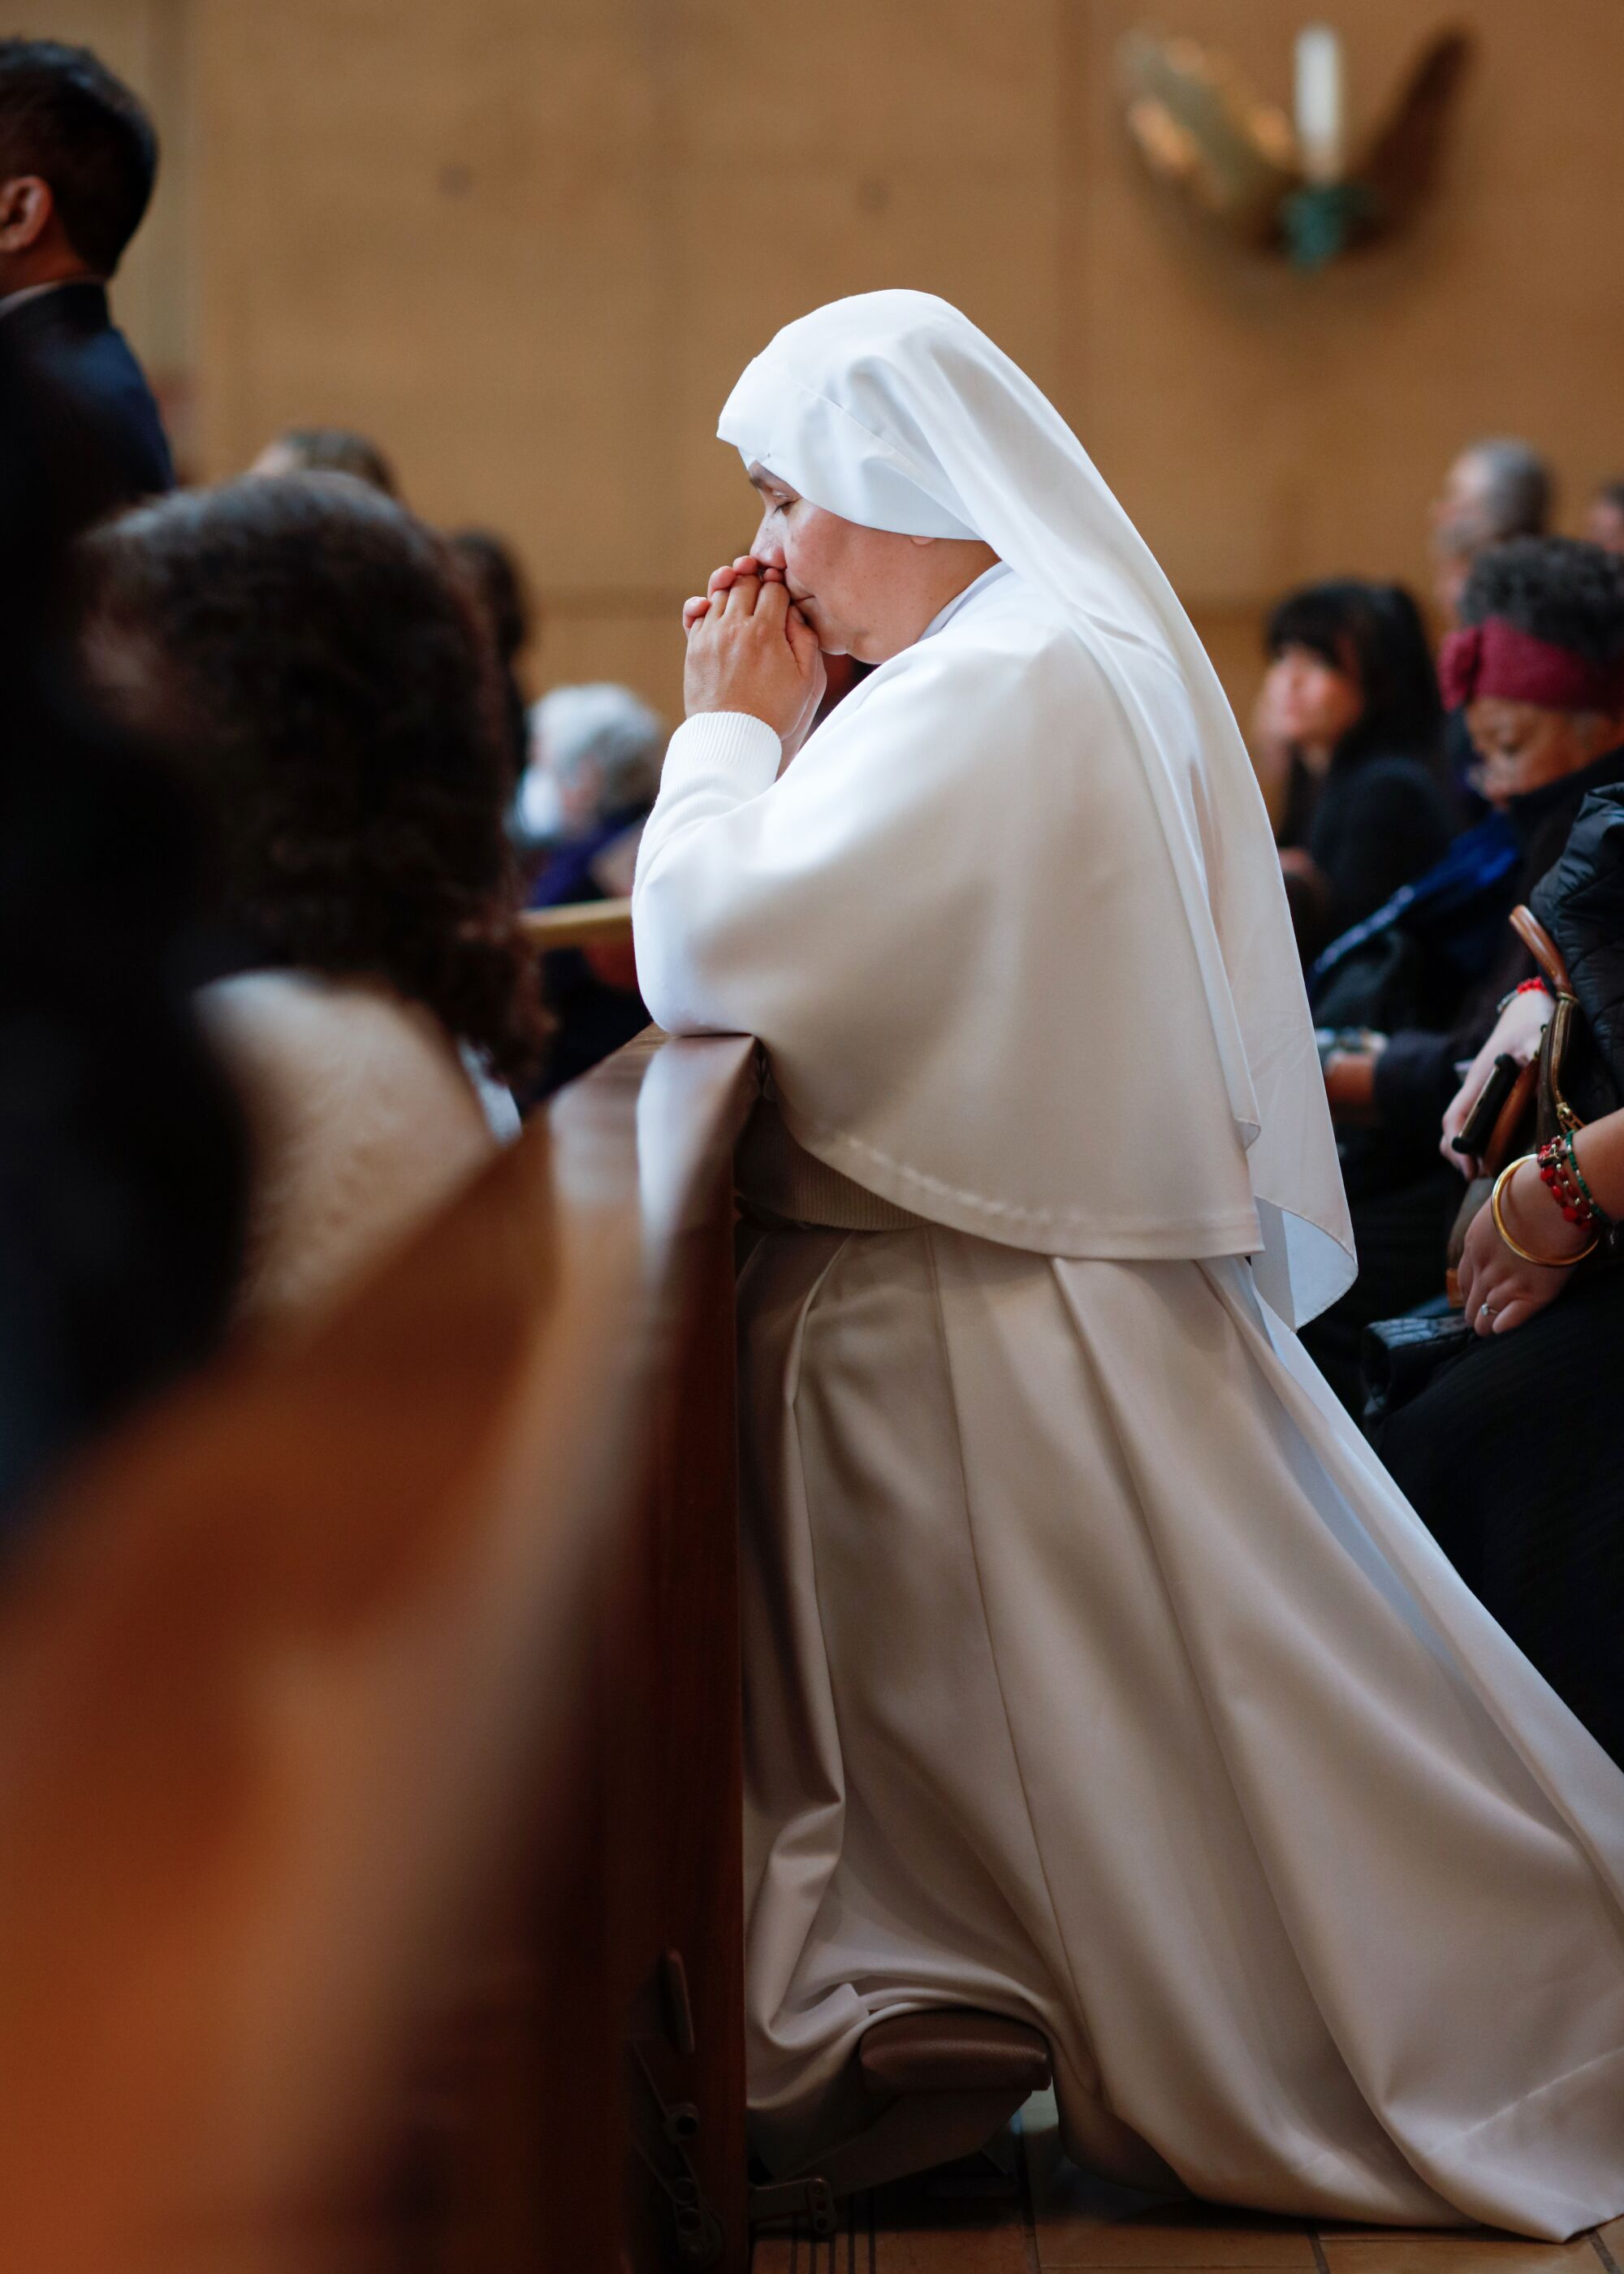 A nun in white habit kneels and prays in church pews